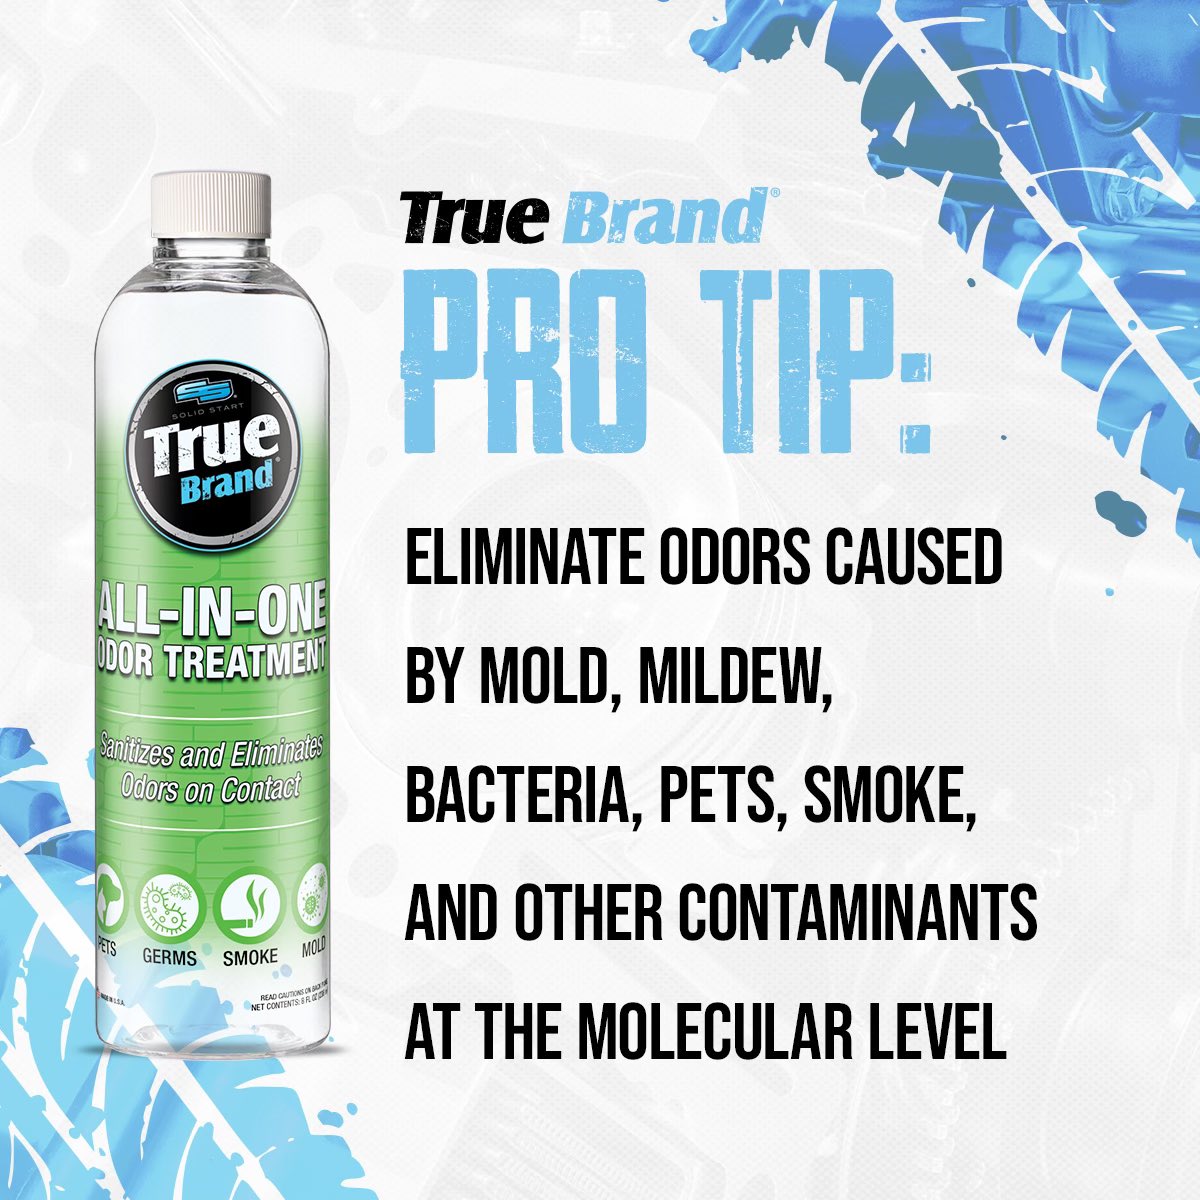 Don’t mask vehicle odors; ELIMINATE them! 💪 True Brand All-In-One Odor Treatment is engineered to quickly and permanently remove odors caused by mold, mildew, bacteria, pets, smoke, spills, and other contaminants at the molecular level. #TrueBrandProducts #TrueBrandTough